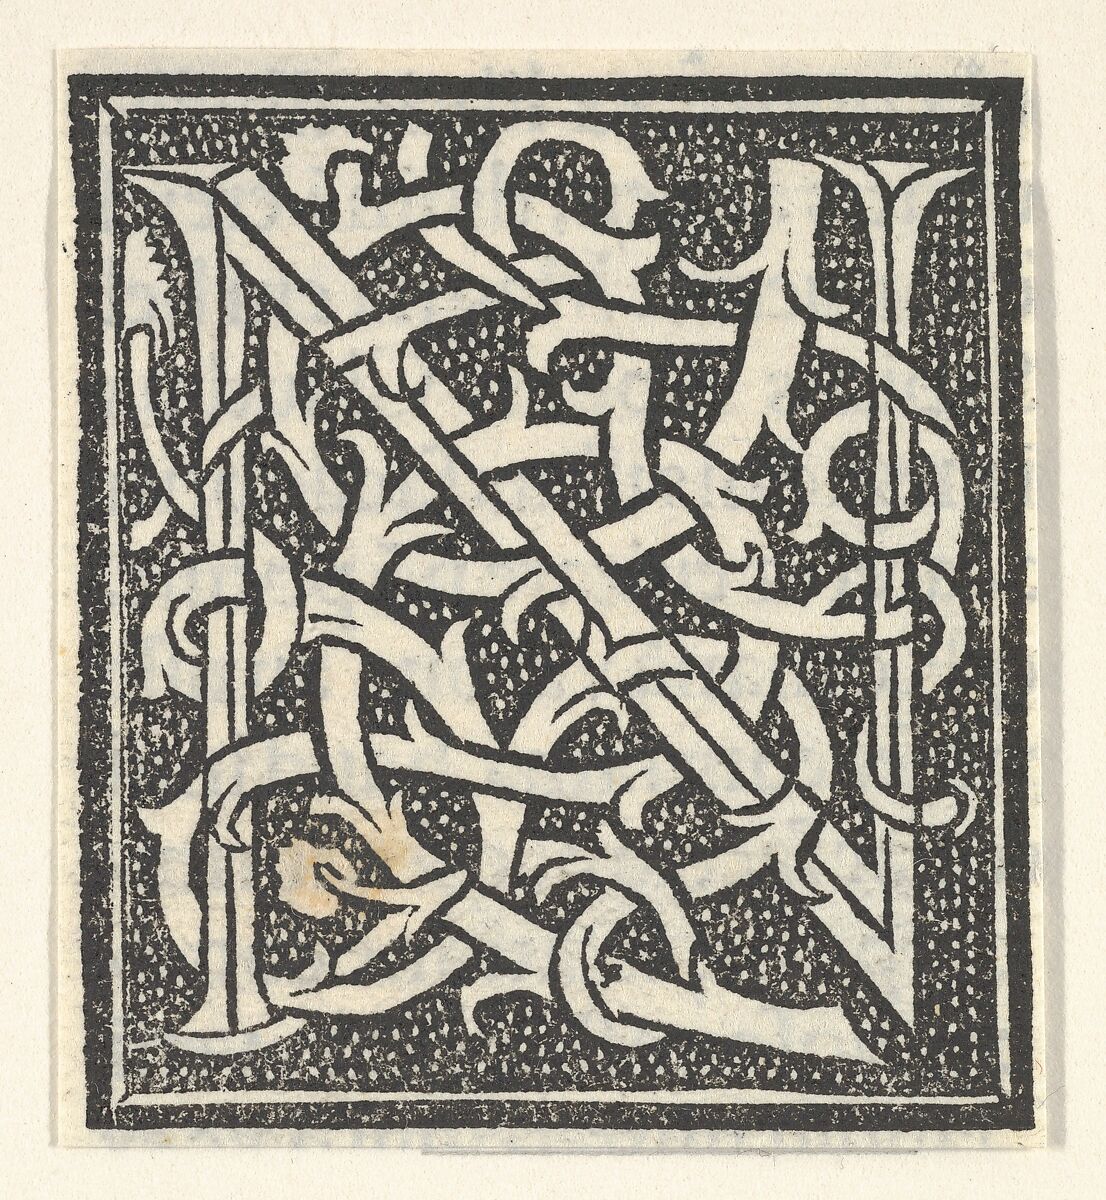 Initial letter N on patterned background, Anonymous, Italian, 16th century, Woodcut, criblé ground 